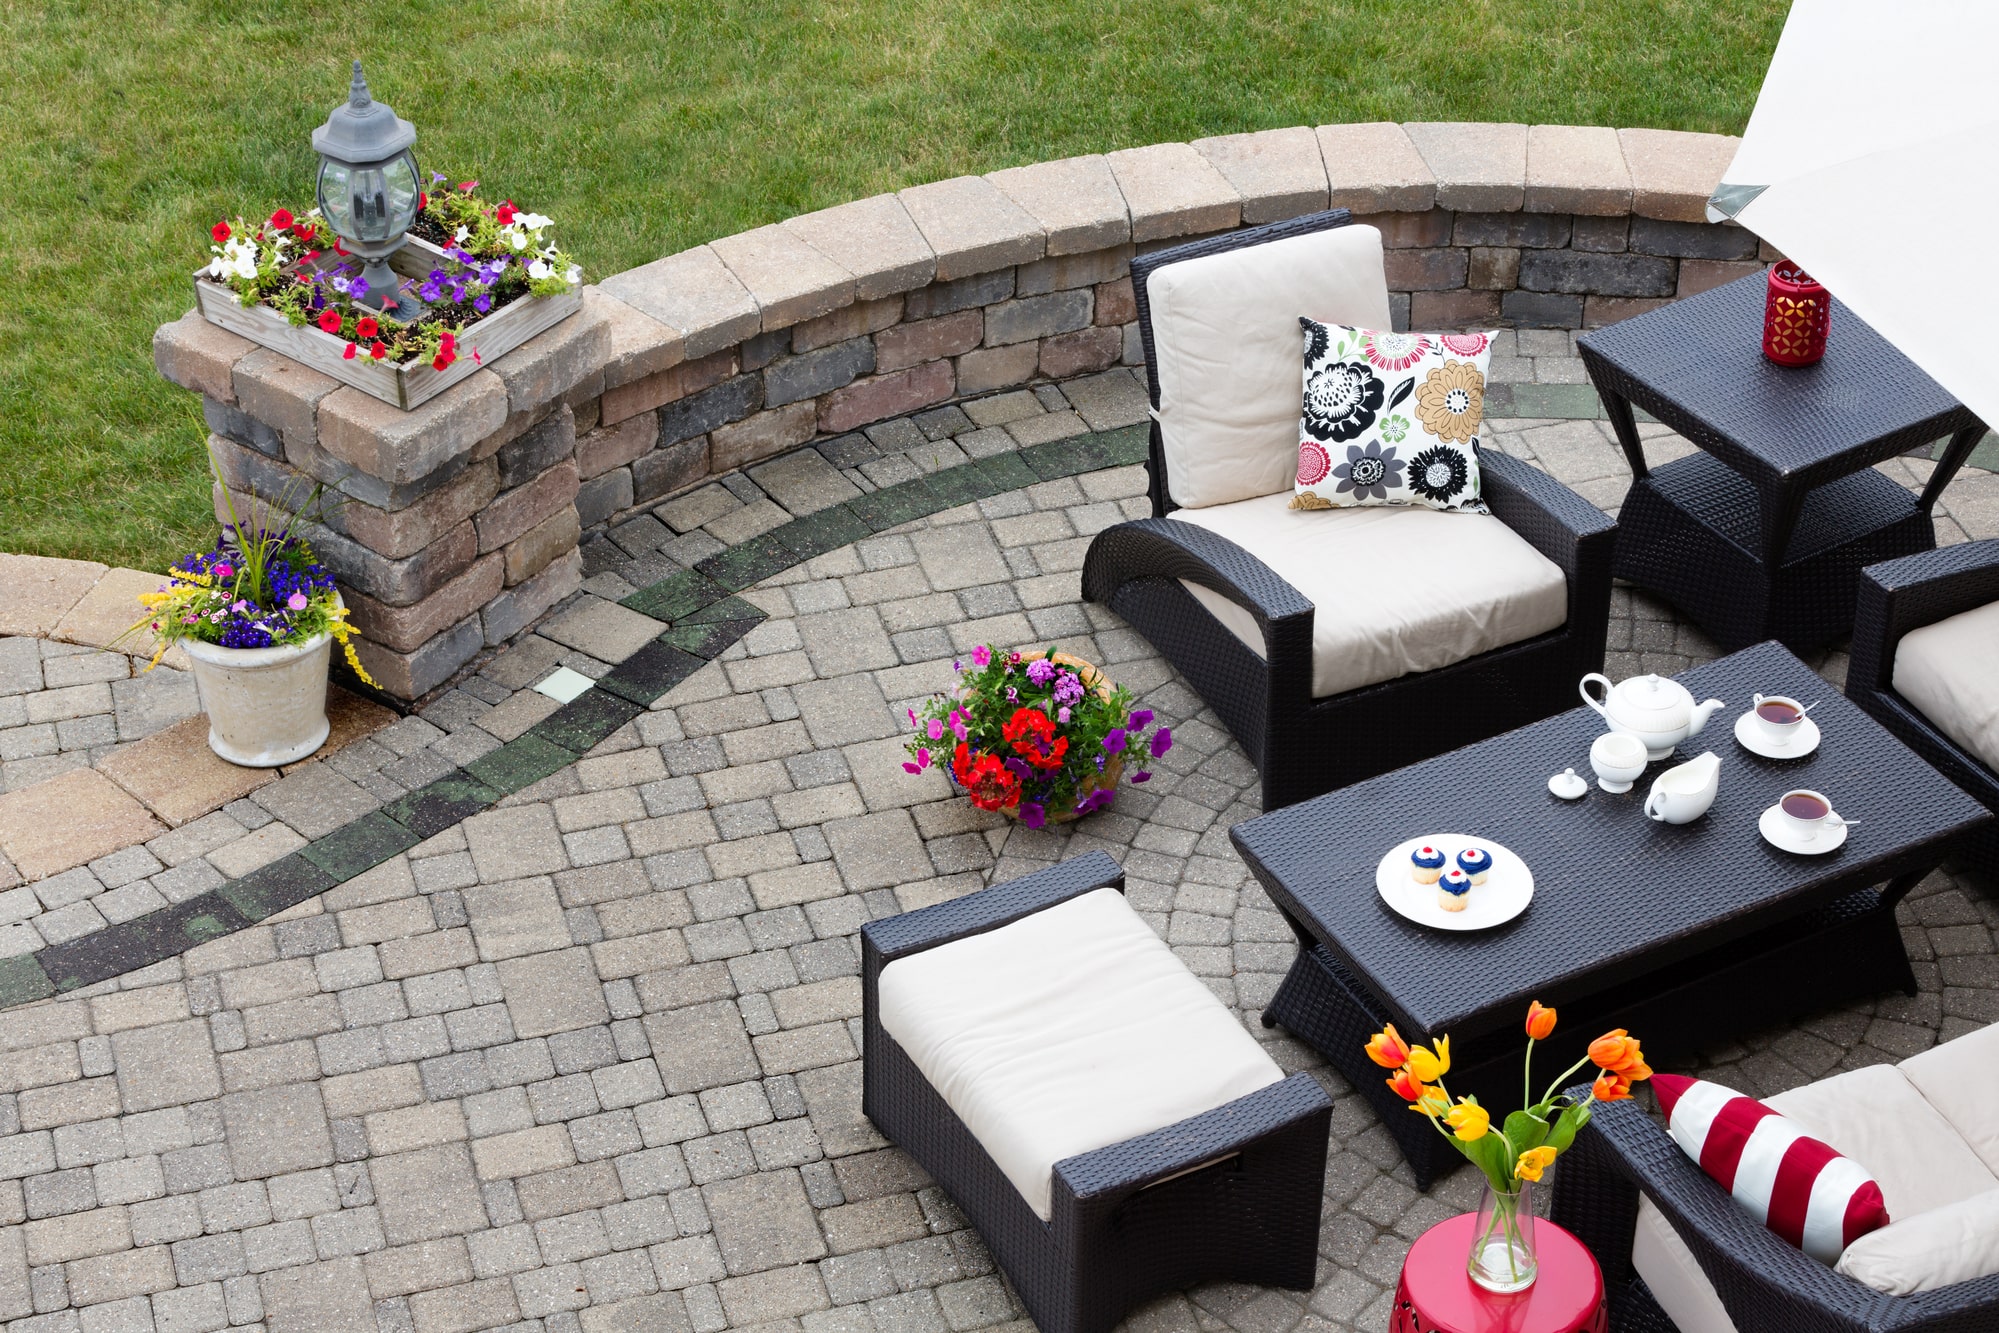 Pavers are a top choice for retaining walls and pool decks.